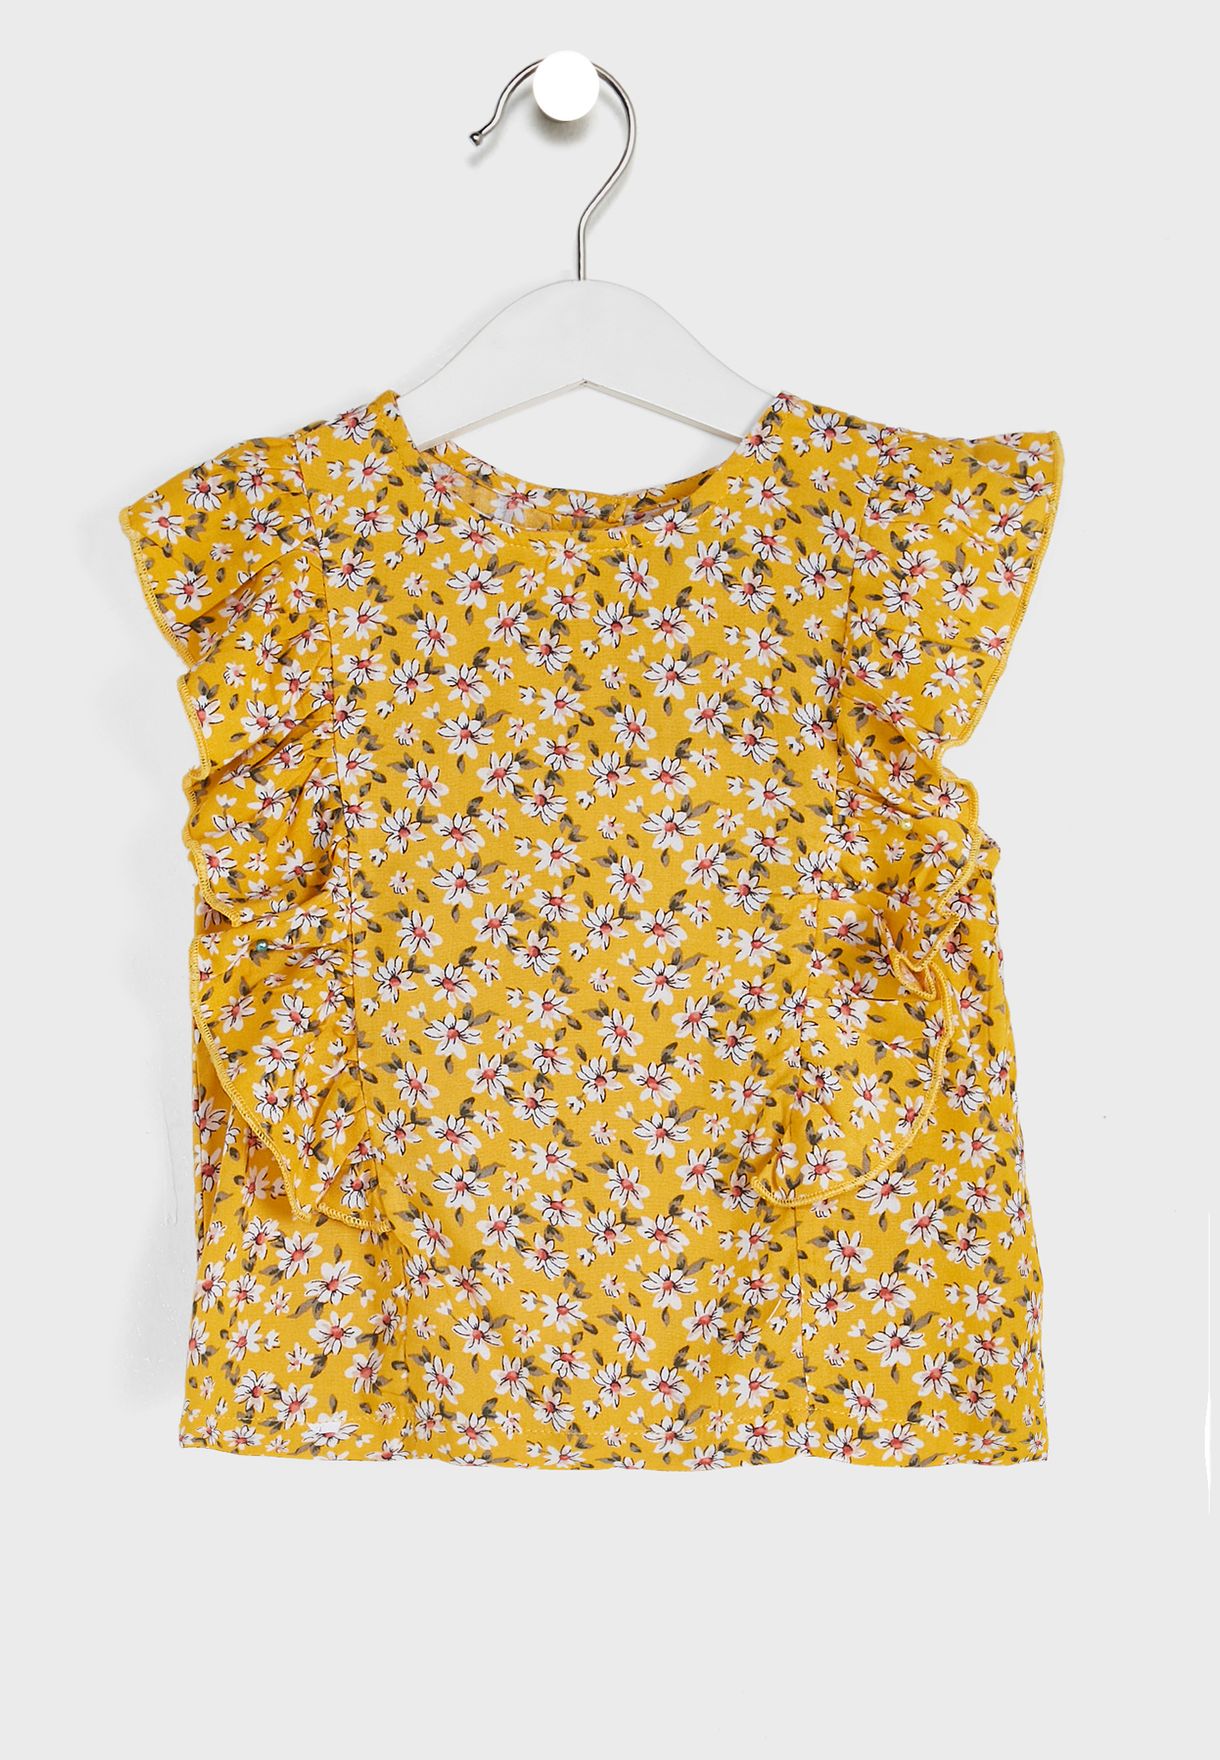 Girls Yellow Printed Top And White Shorts